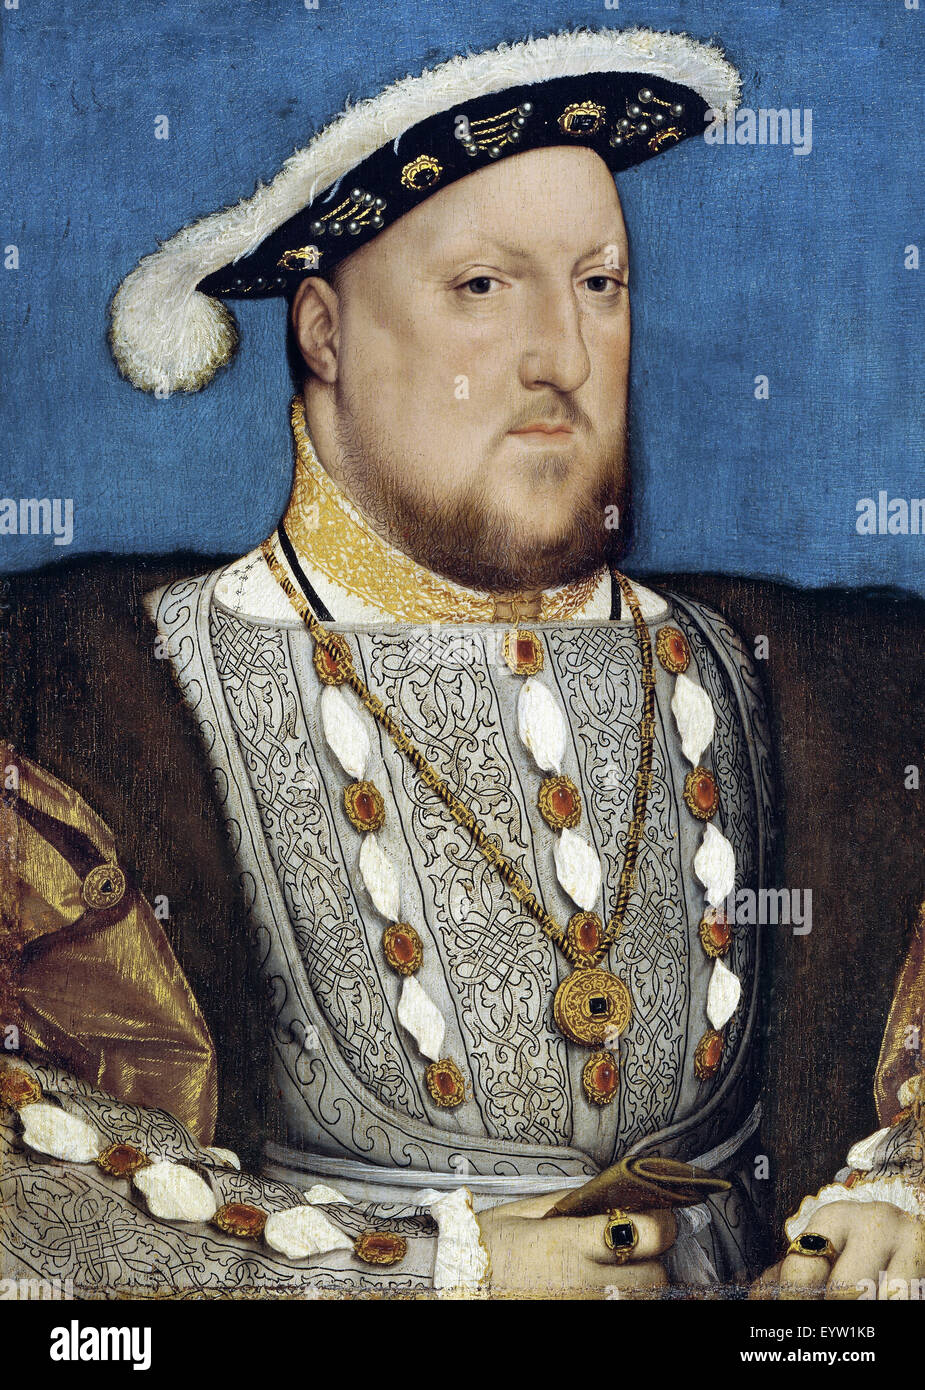 Hans Holbein the Younger, Portrait of Henry VIII of England. Circa 1537. Oil on panel. Thyssen-Bornemisza Museum, Madrid, Spain. Stock Photo